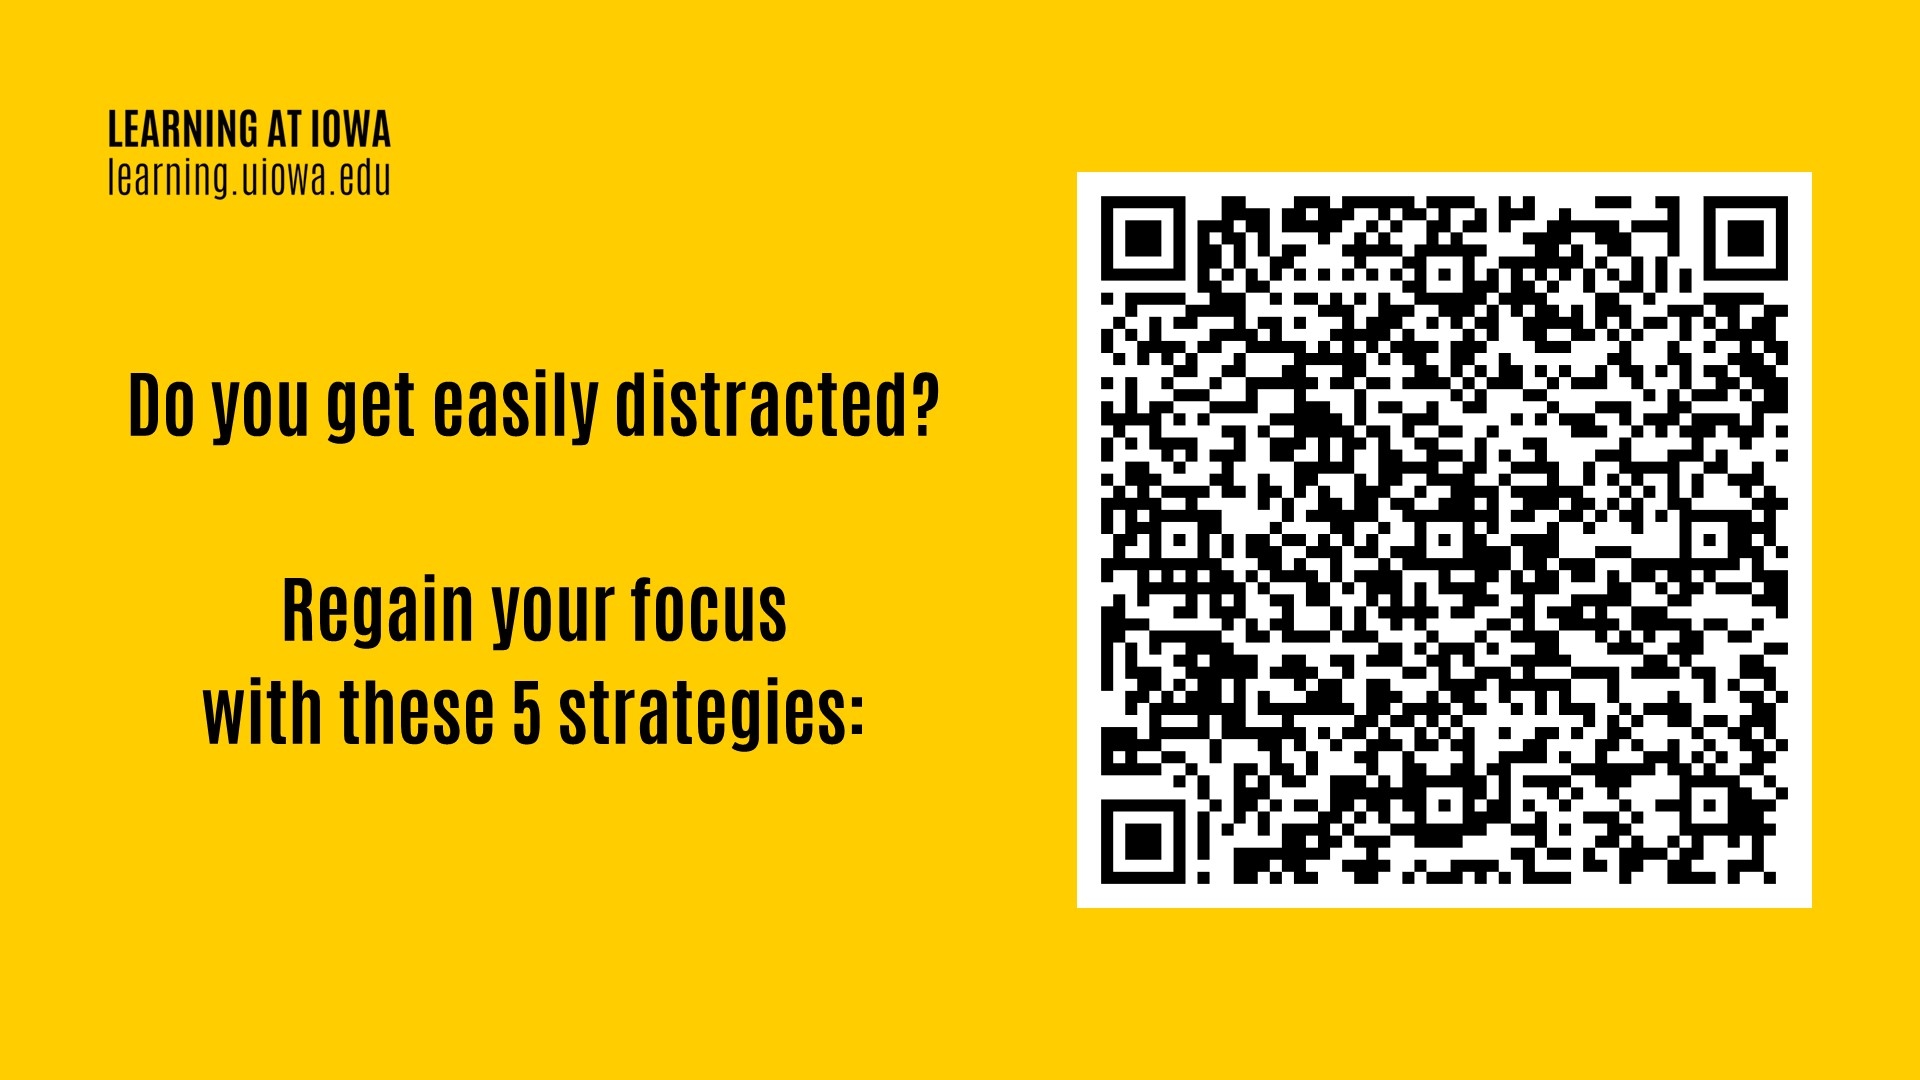 Do you get easily distracted?